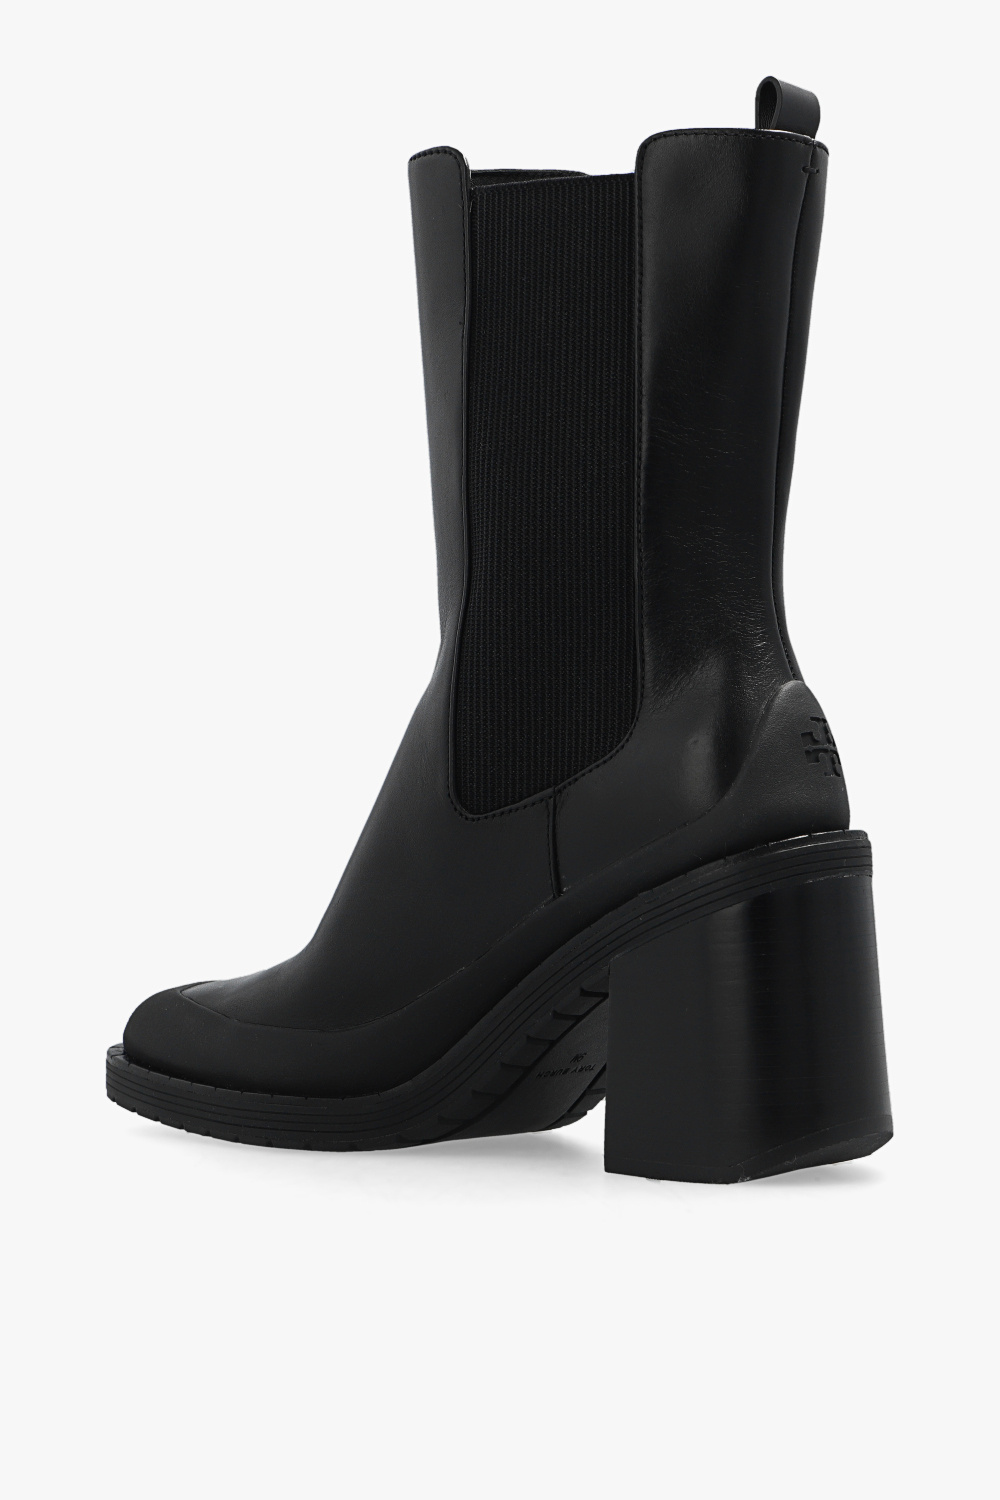 Black 'Expedition' heeled ankle boots Tory Burch - Vitkac KR